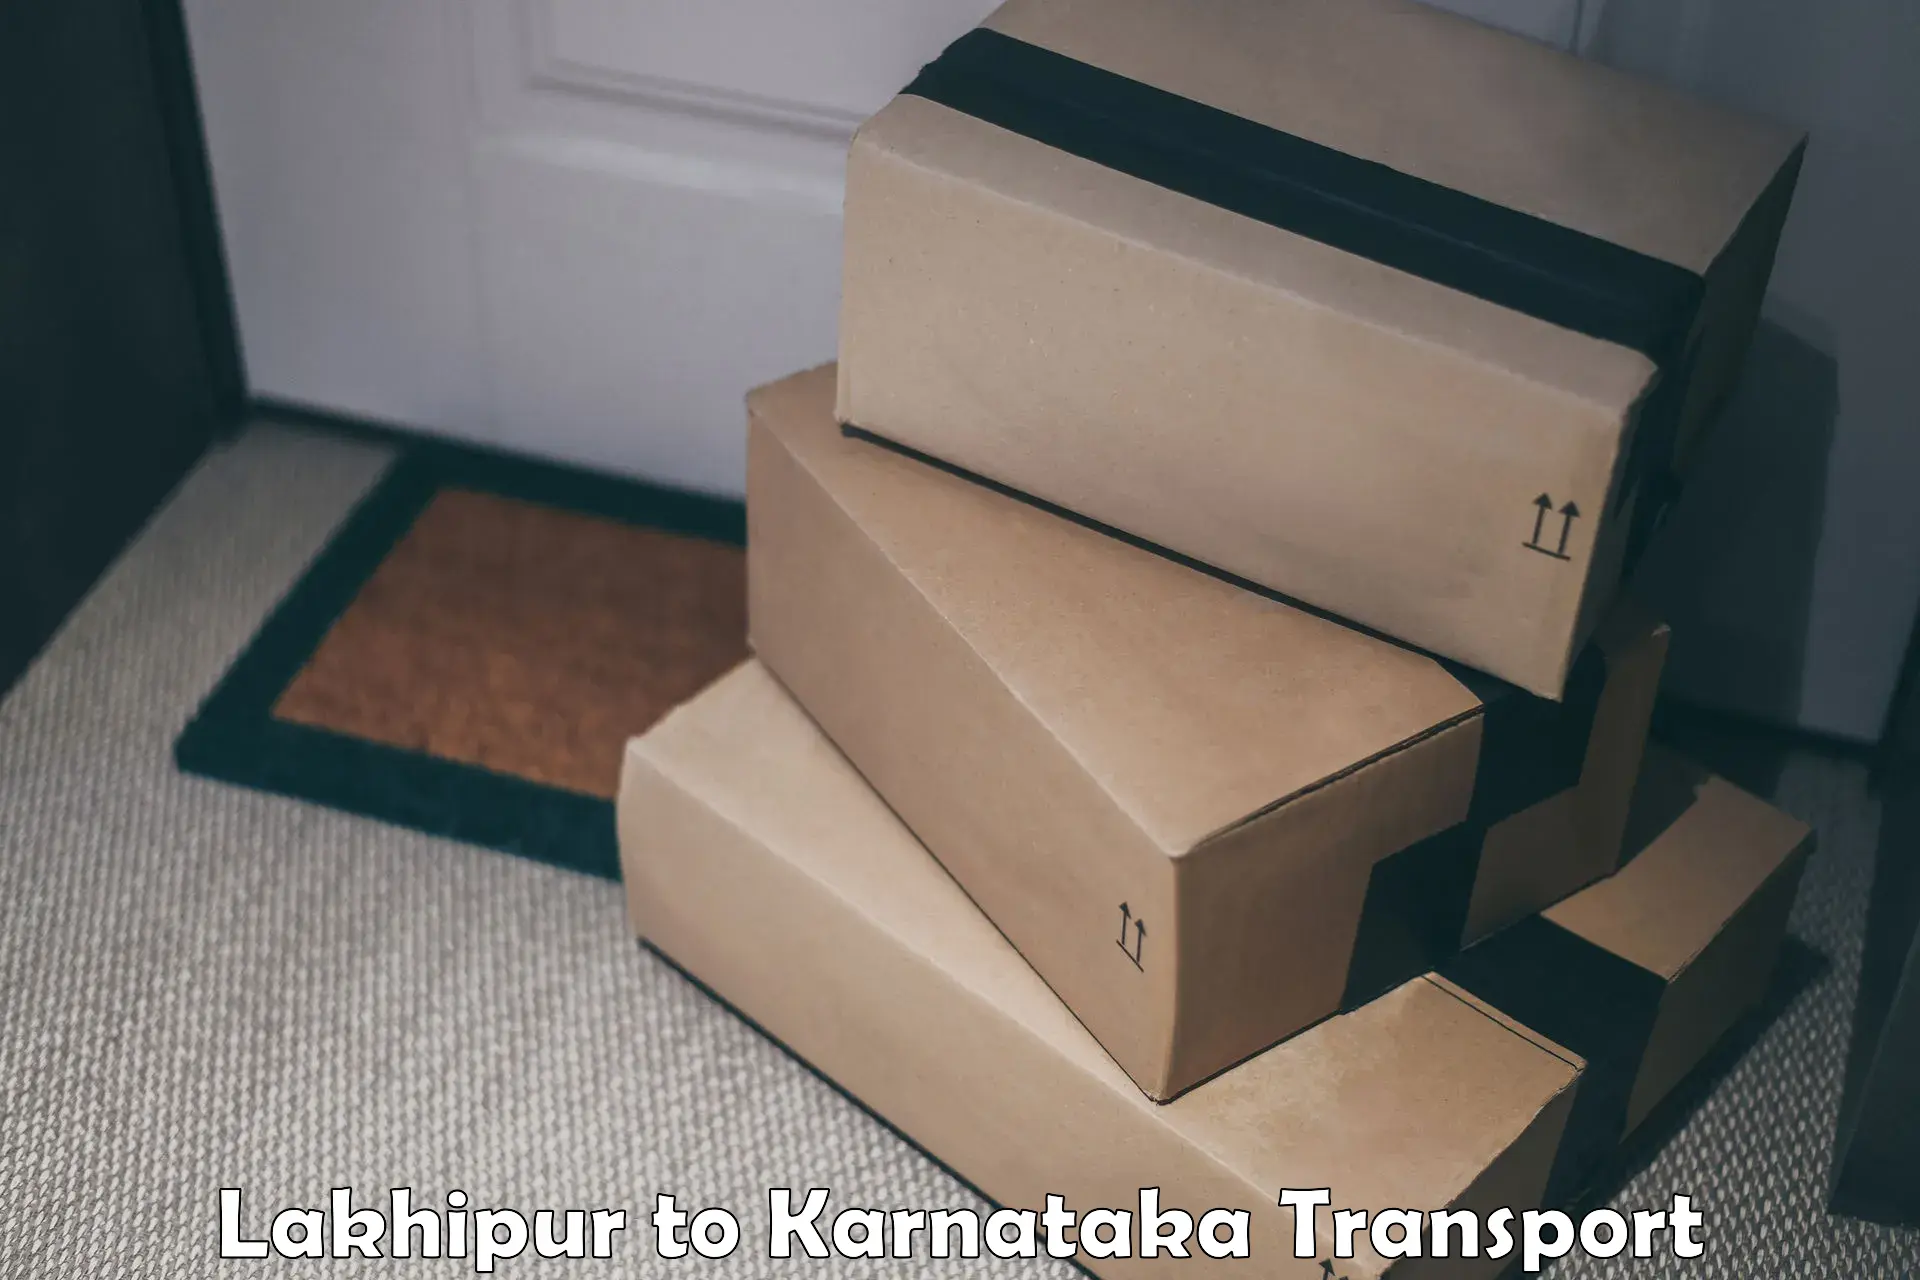 Truck transport companies in India Lakhipur to Bijapur